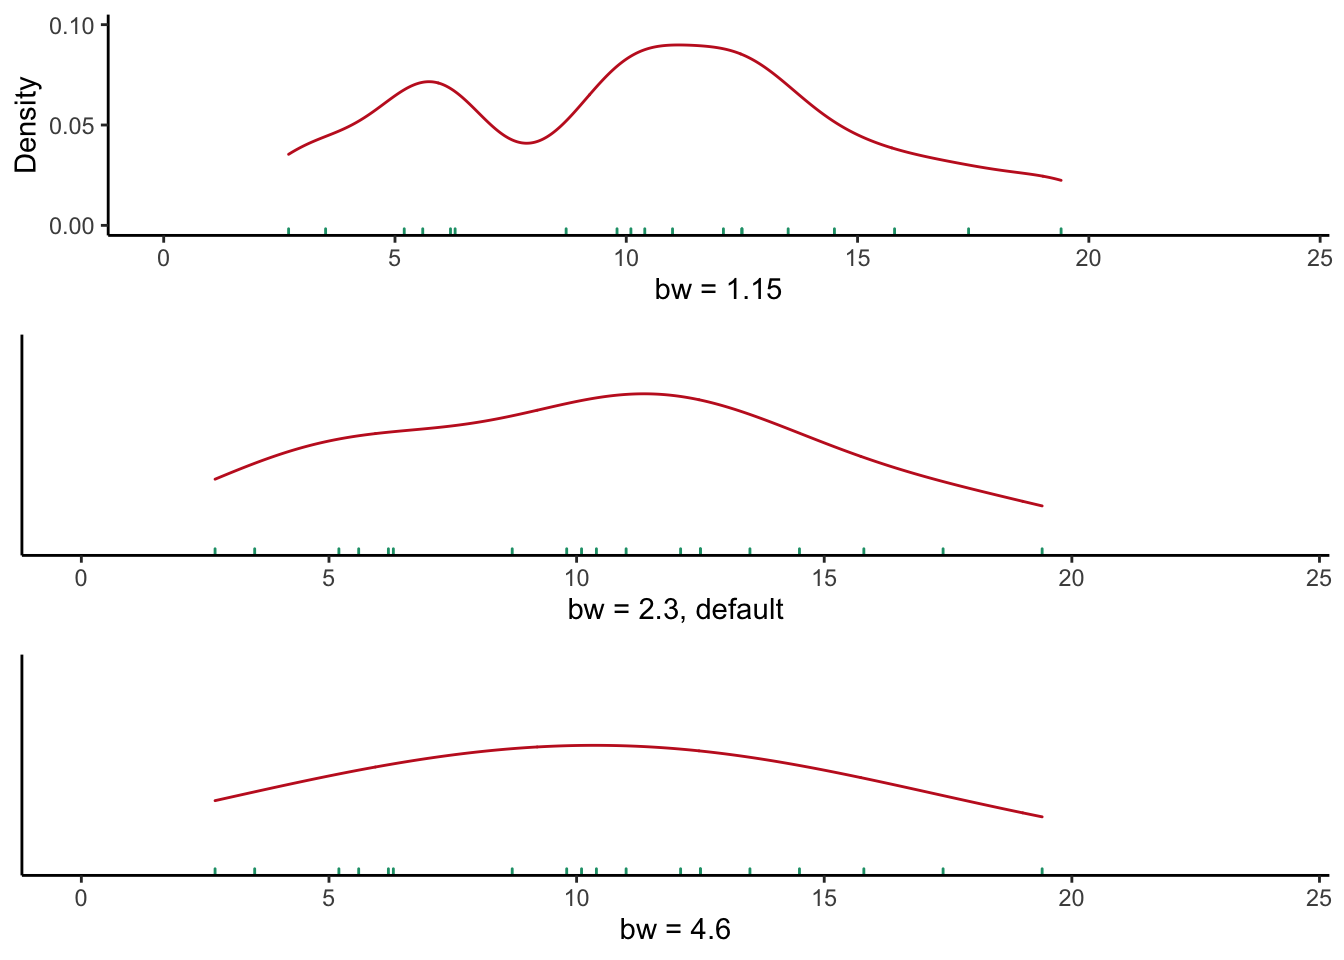 Density plots of mammalian total sleep time appear strikingly different when using different bandwidths.